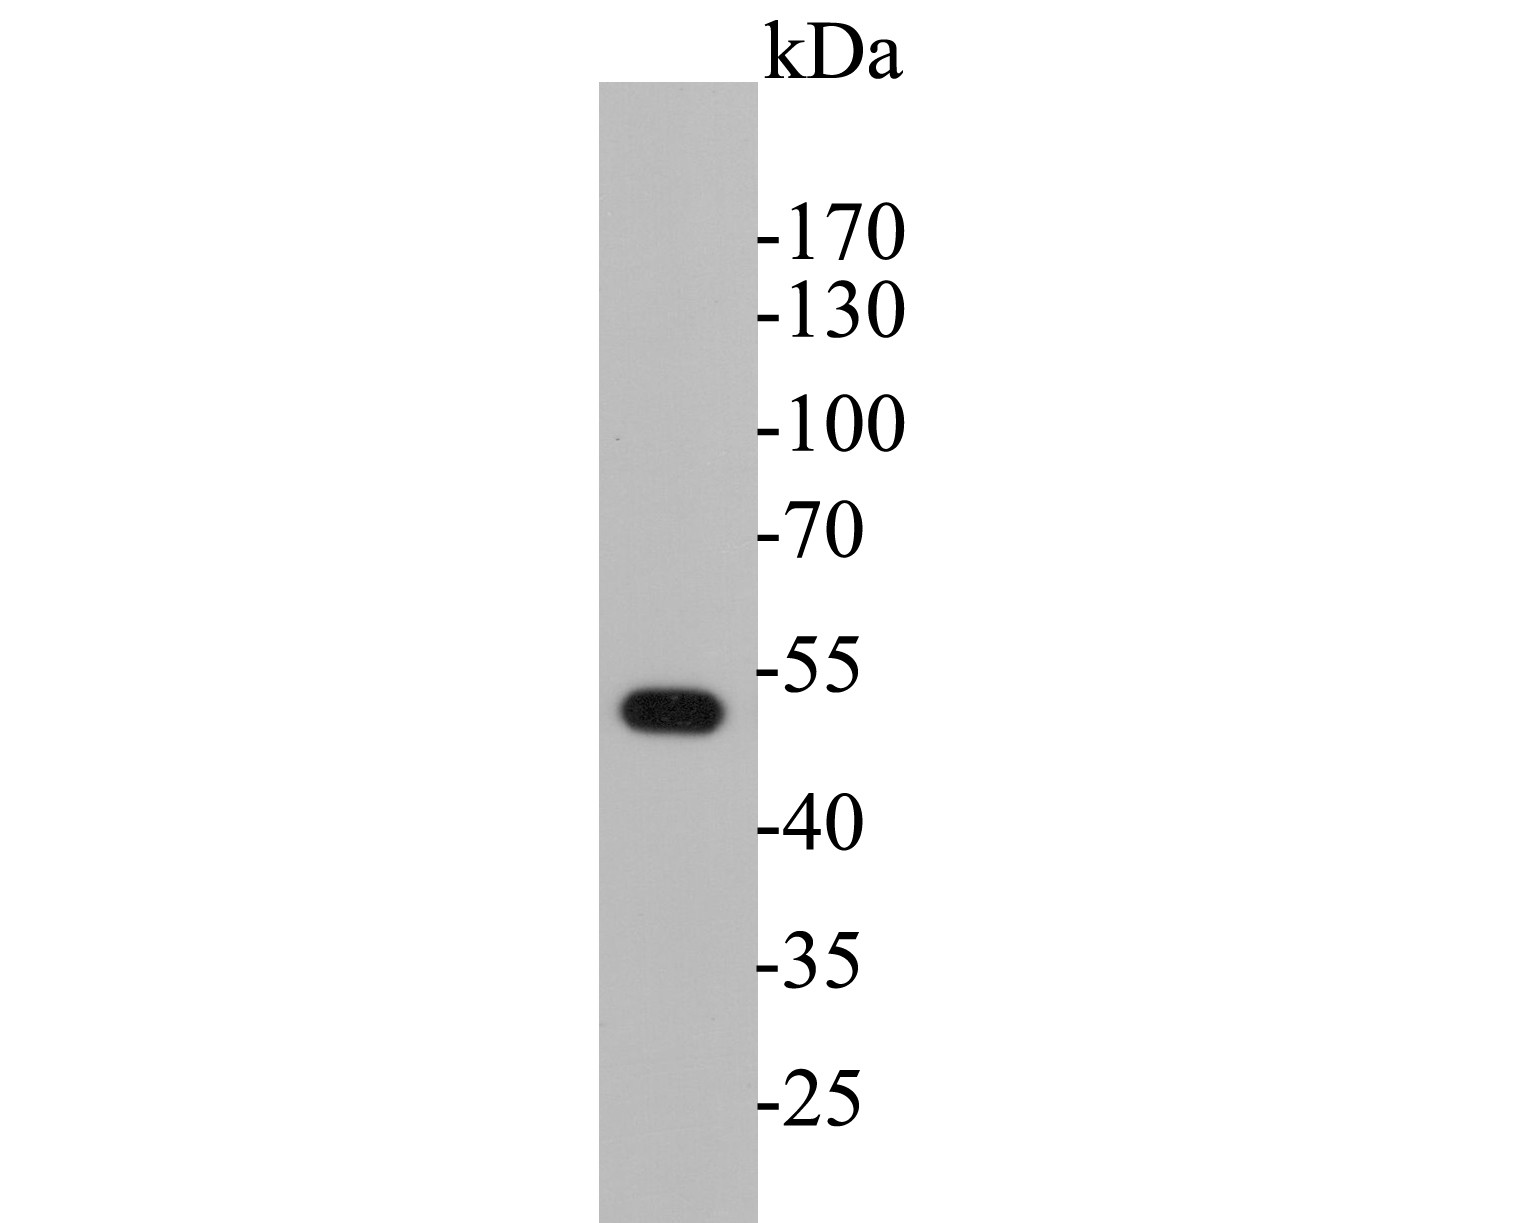 Western blot analysis of Cytokeratin 17 on SiHa cell lysate. Proteins were transferred to a PVDF membrane and blocked with 5% BSA in PBS for 1 hour at room temperature. The primary antibody (EM1901-30, 1/500) was used in 5% BSA at room temperature for 2 hours. Goat Anti-Mouse IgG - HRP Secondary Antibody (HA1006) at 1:5,000 dilution was used for 1 hour at room temperature.